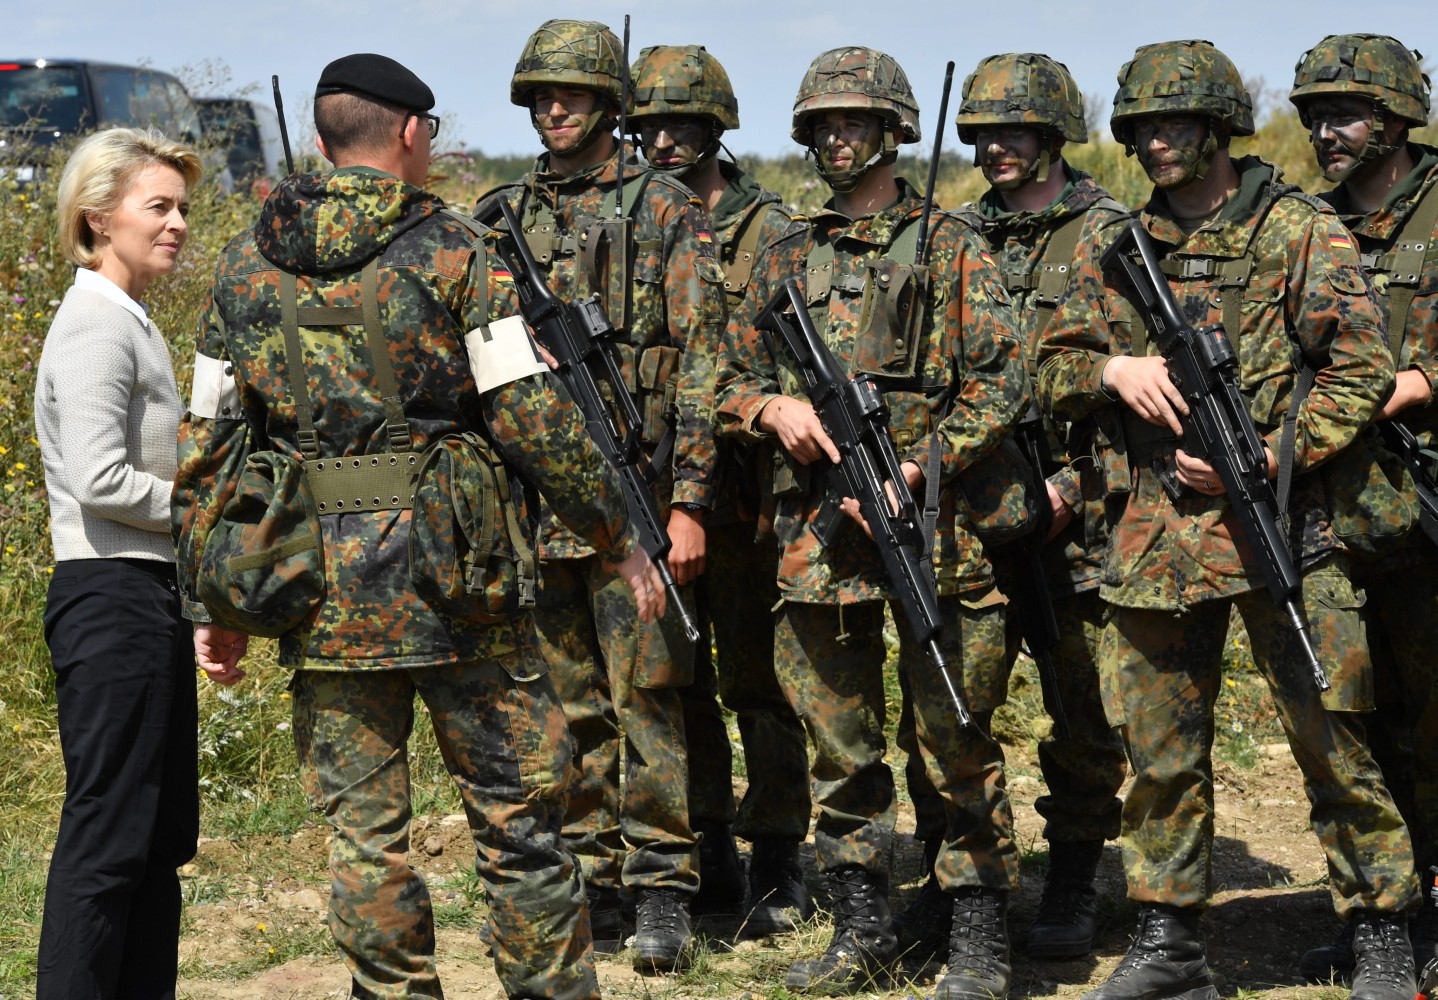 German Military, Police to Team Up Amid Fears of ISIS ...